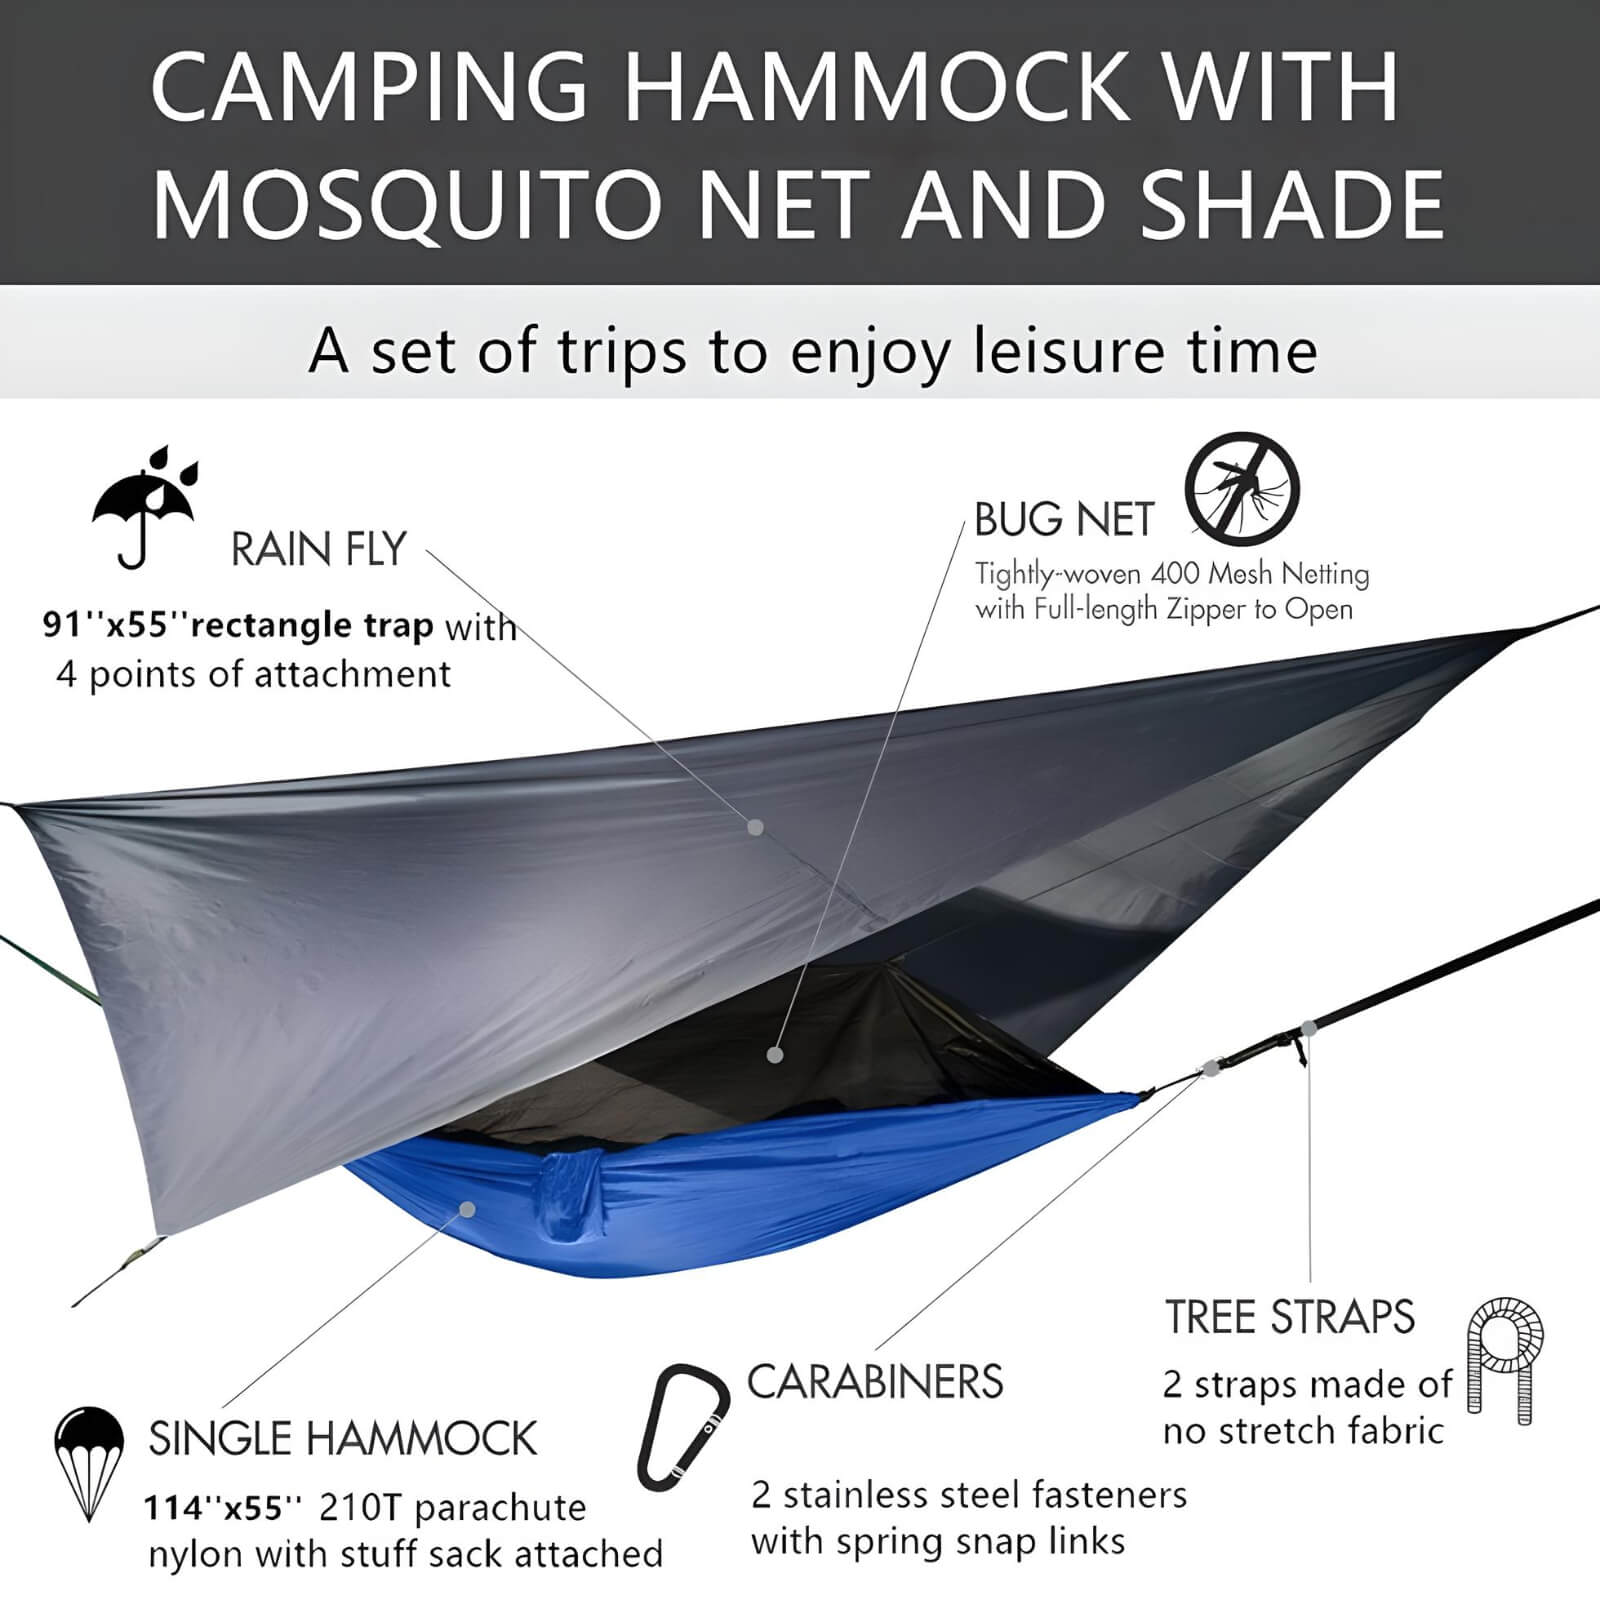    hammock-with-mosquito-net-tent